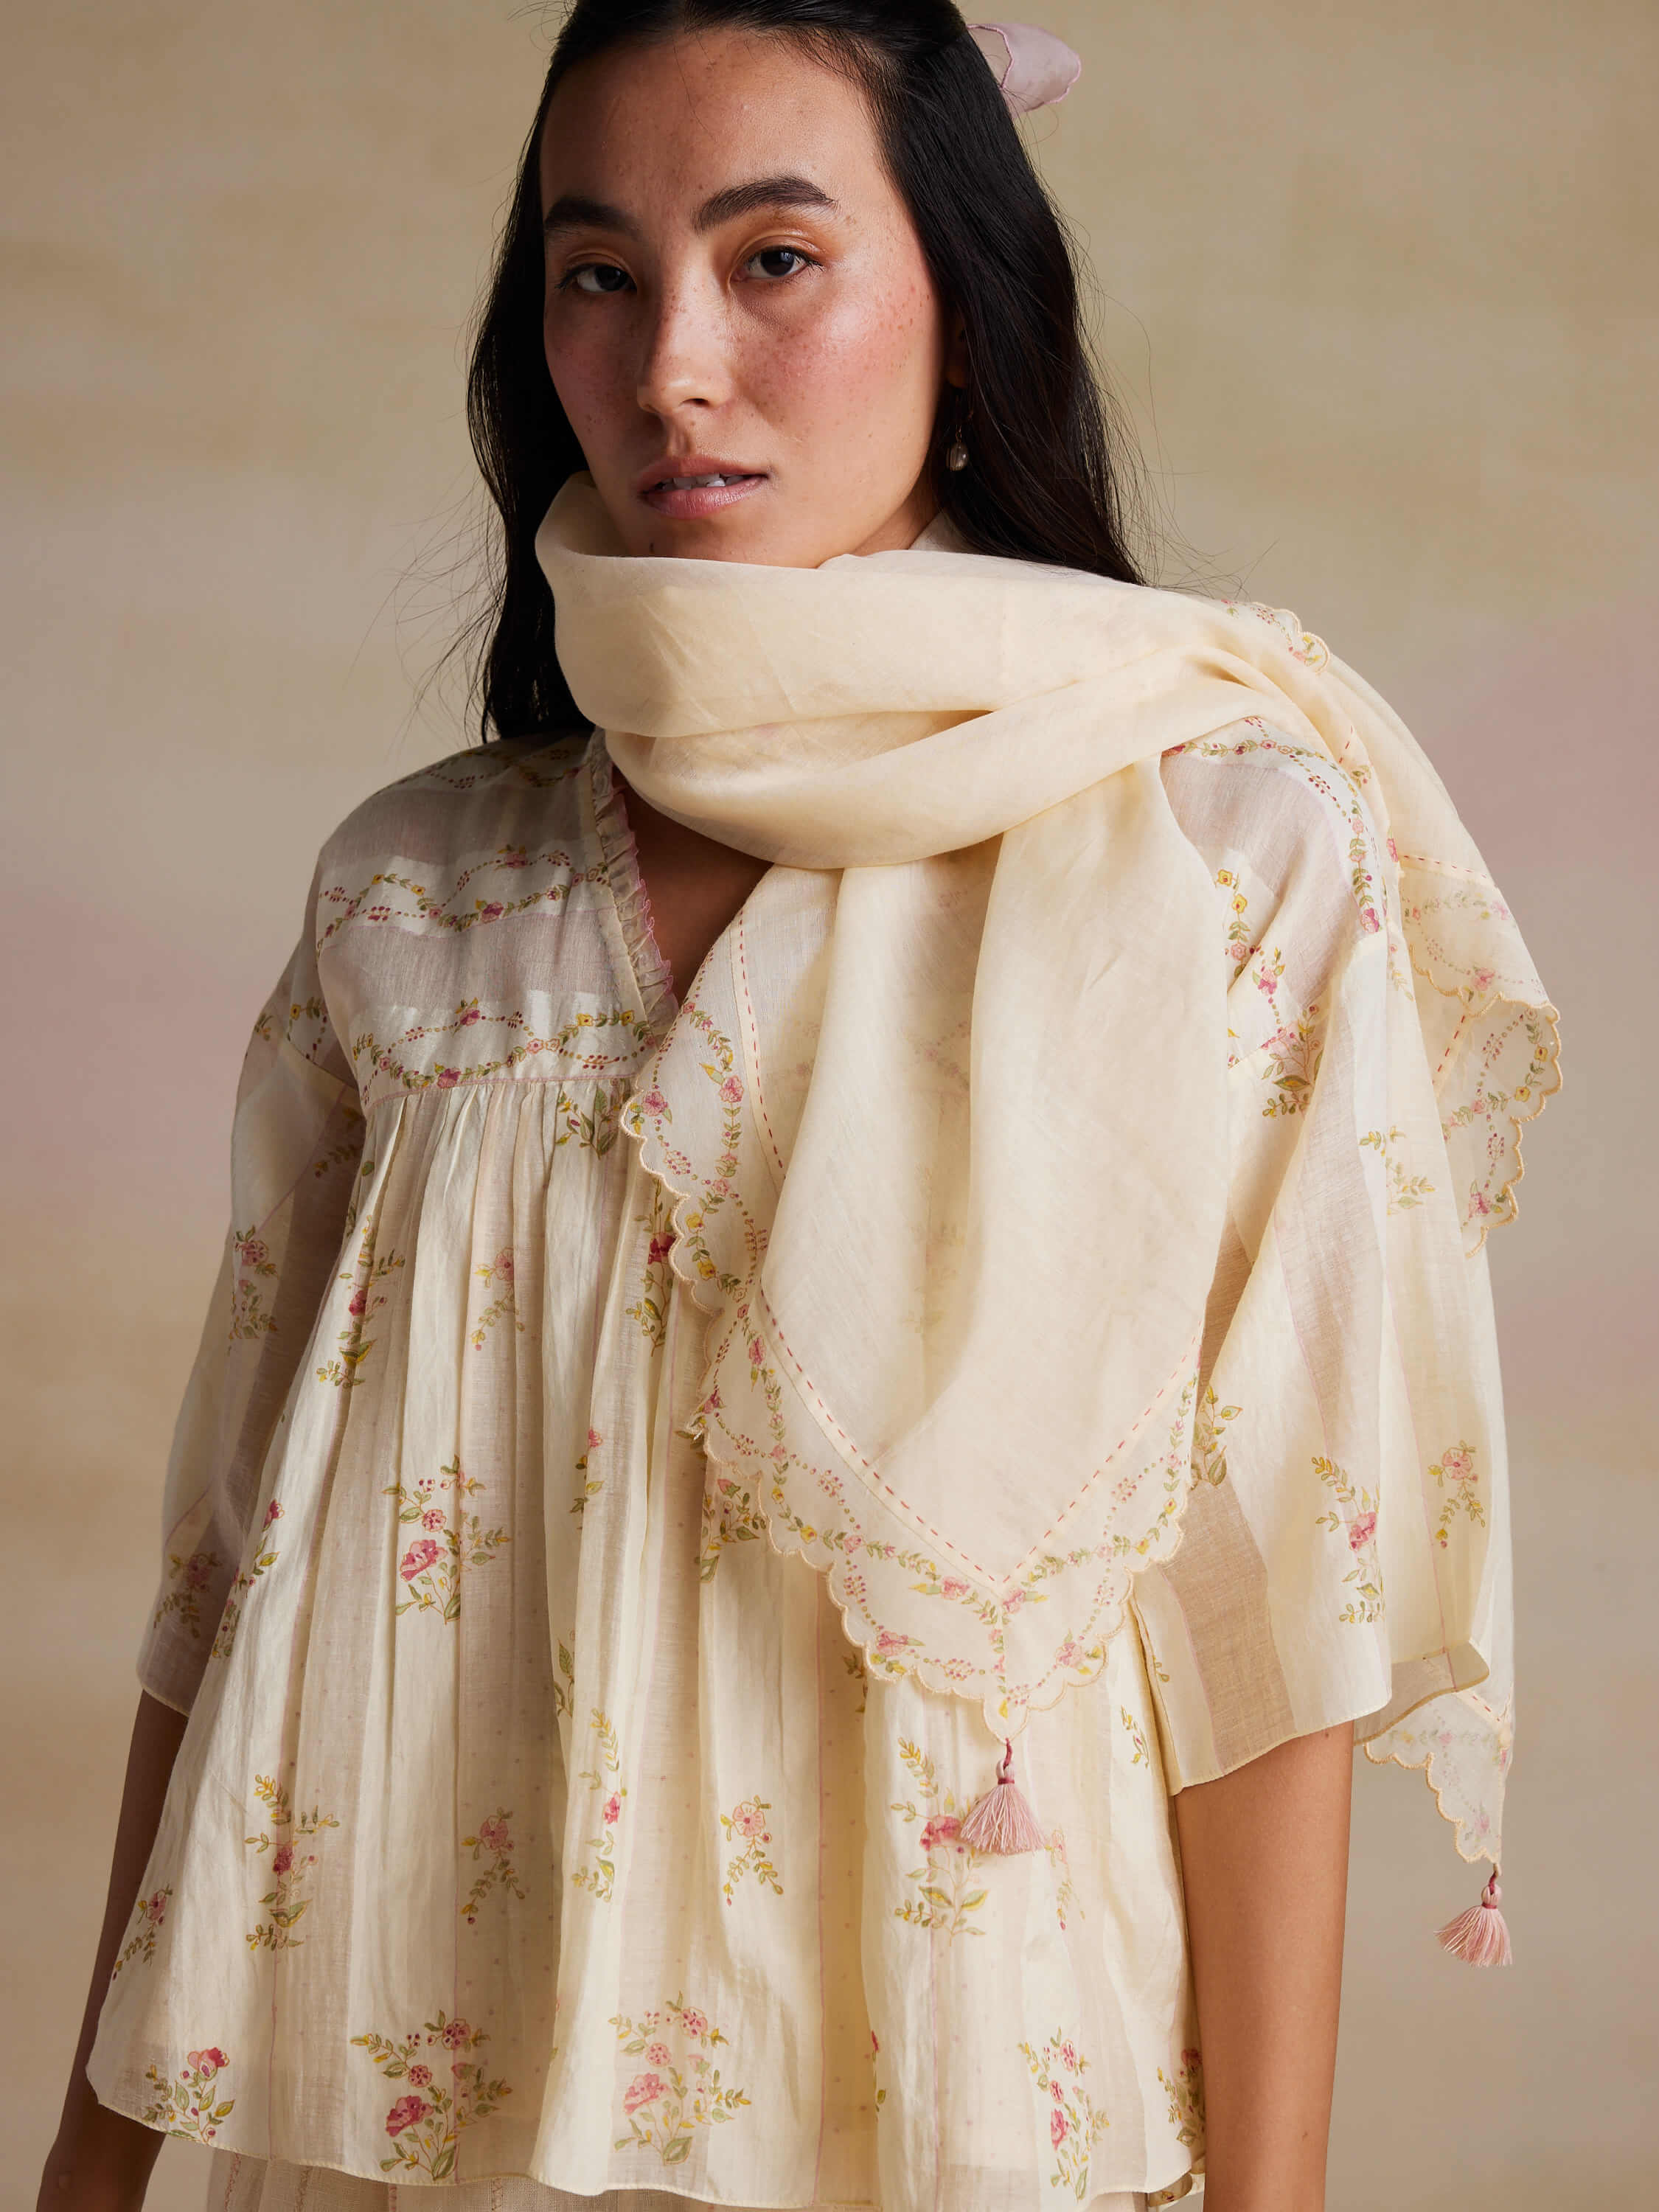 Woman in floral embroidered top and scarf, beige background.